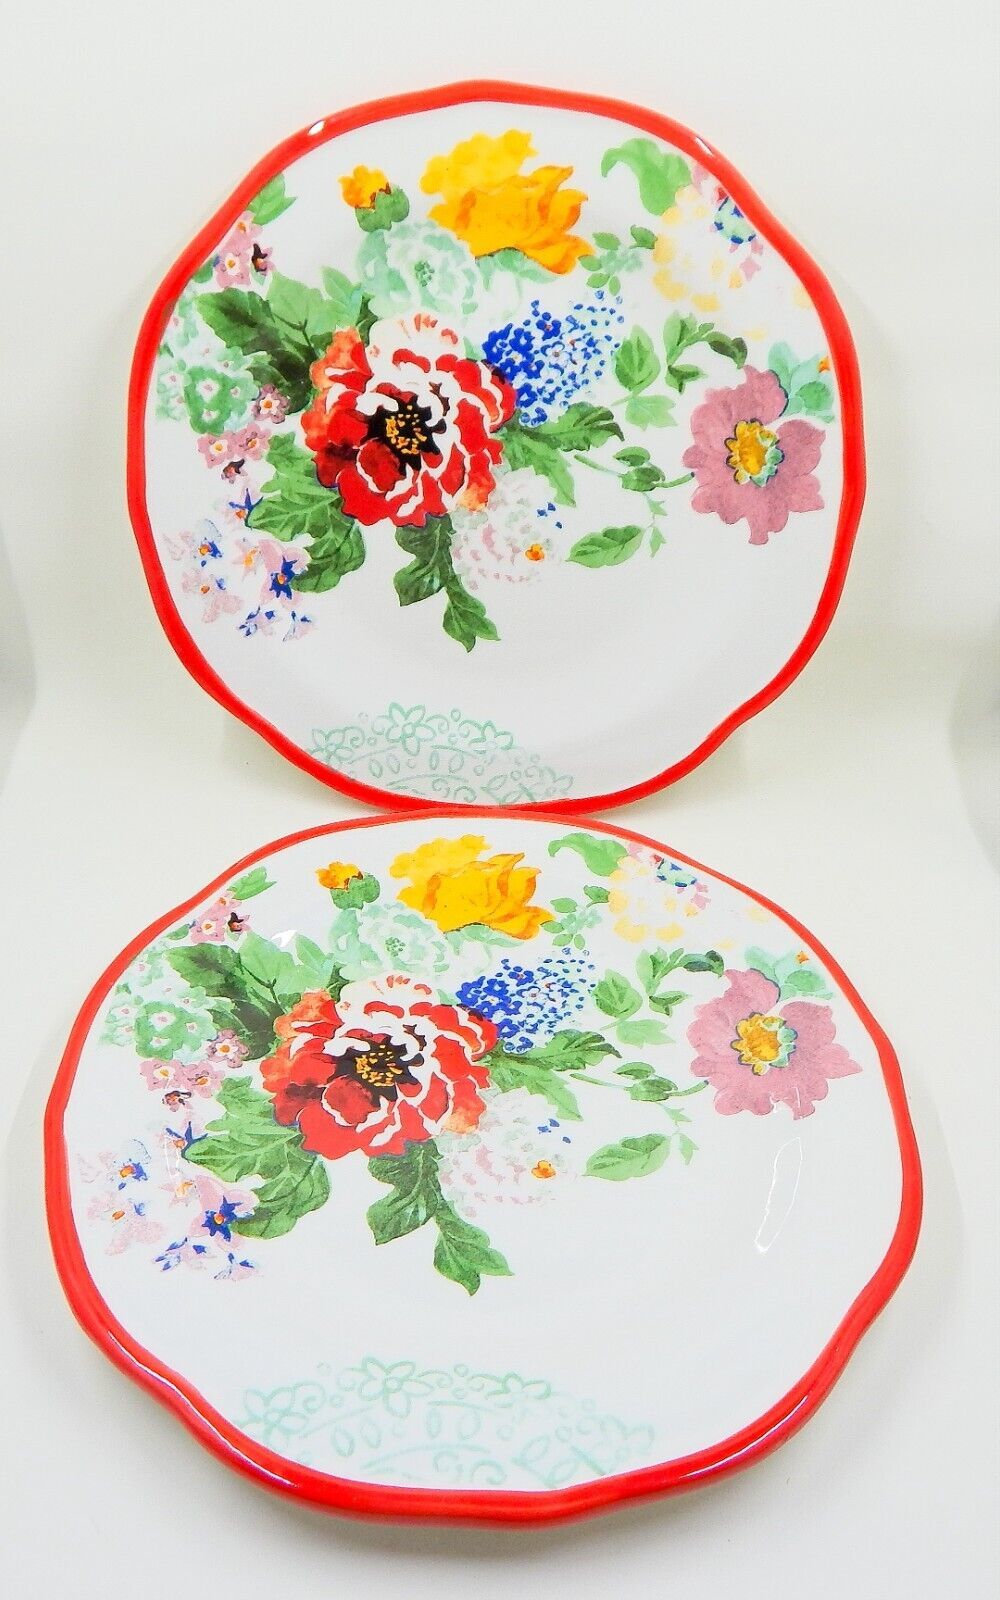 Pioneer Woman Country Garden Salad Lunch Plates Red Trim Set of 2 Replacement - $19.99